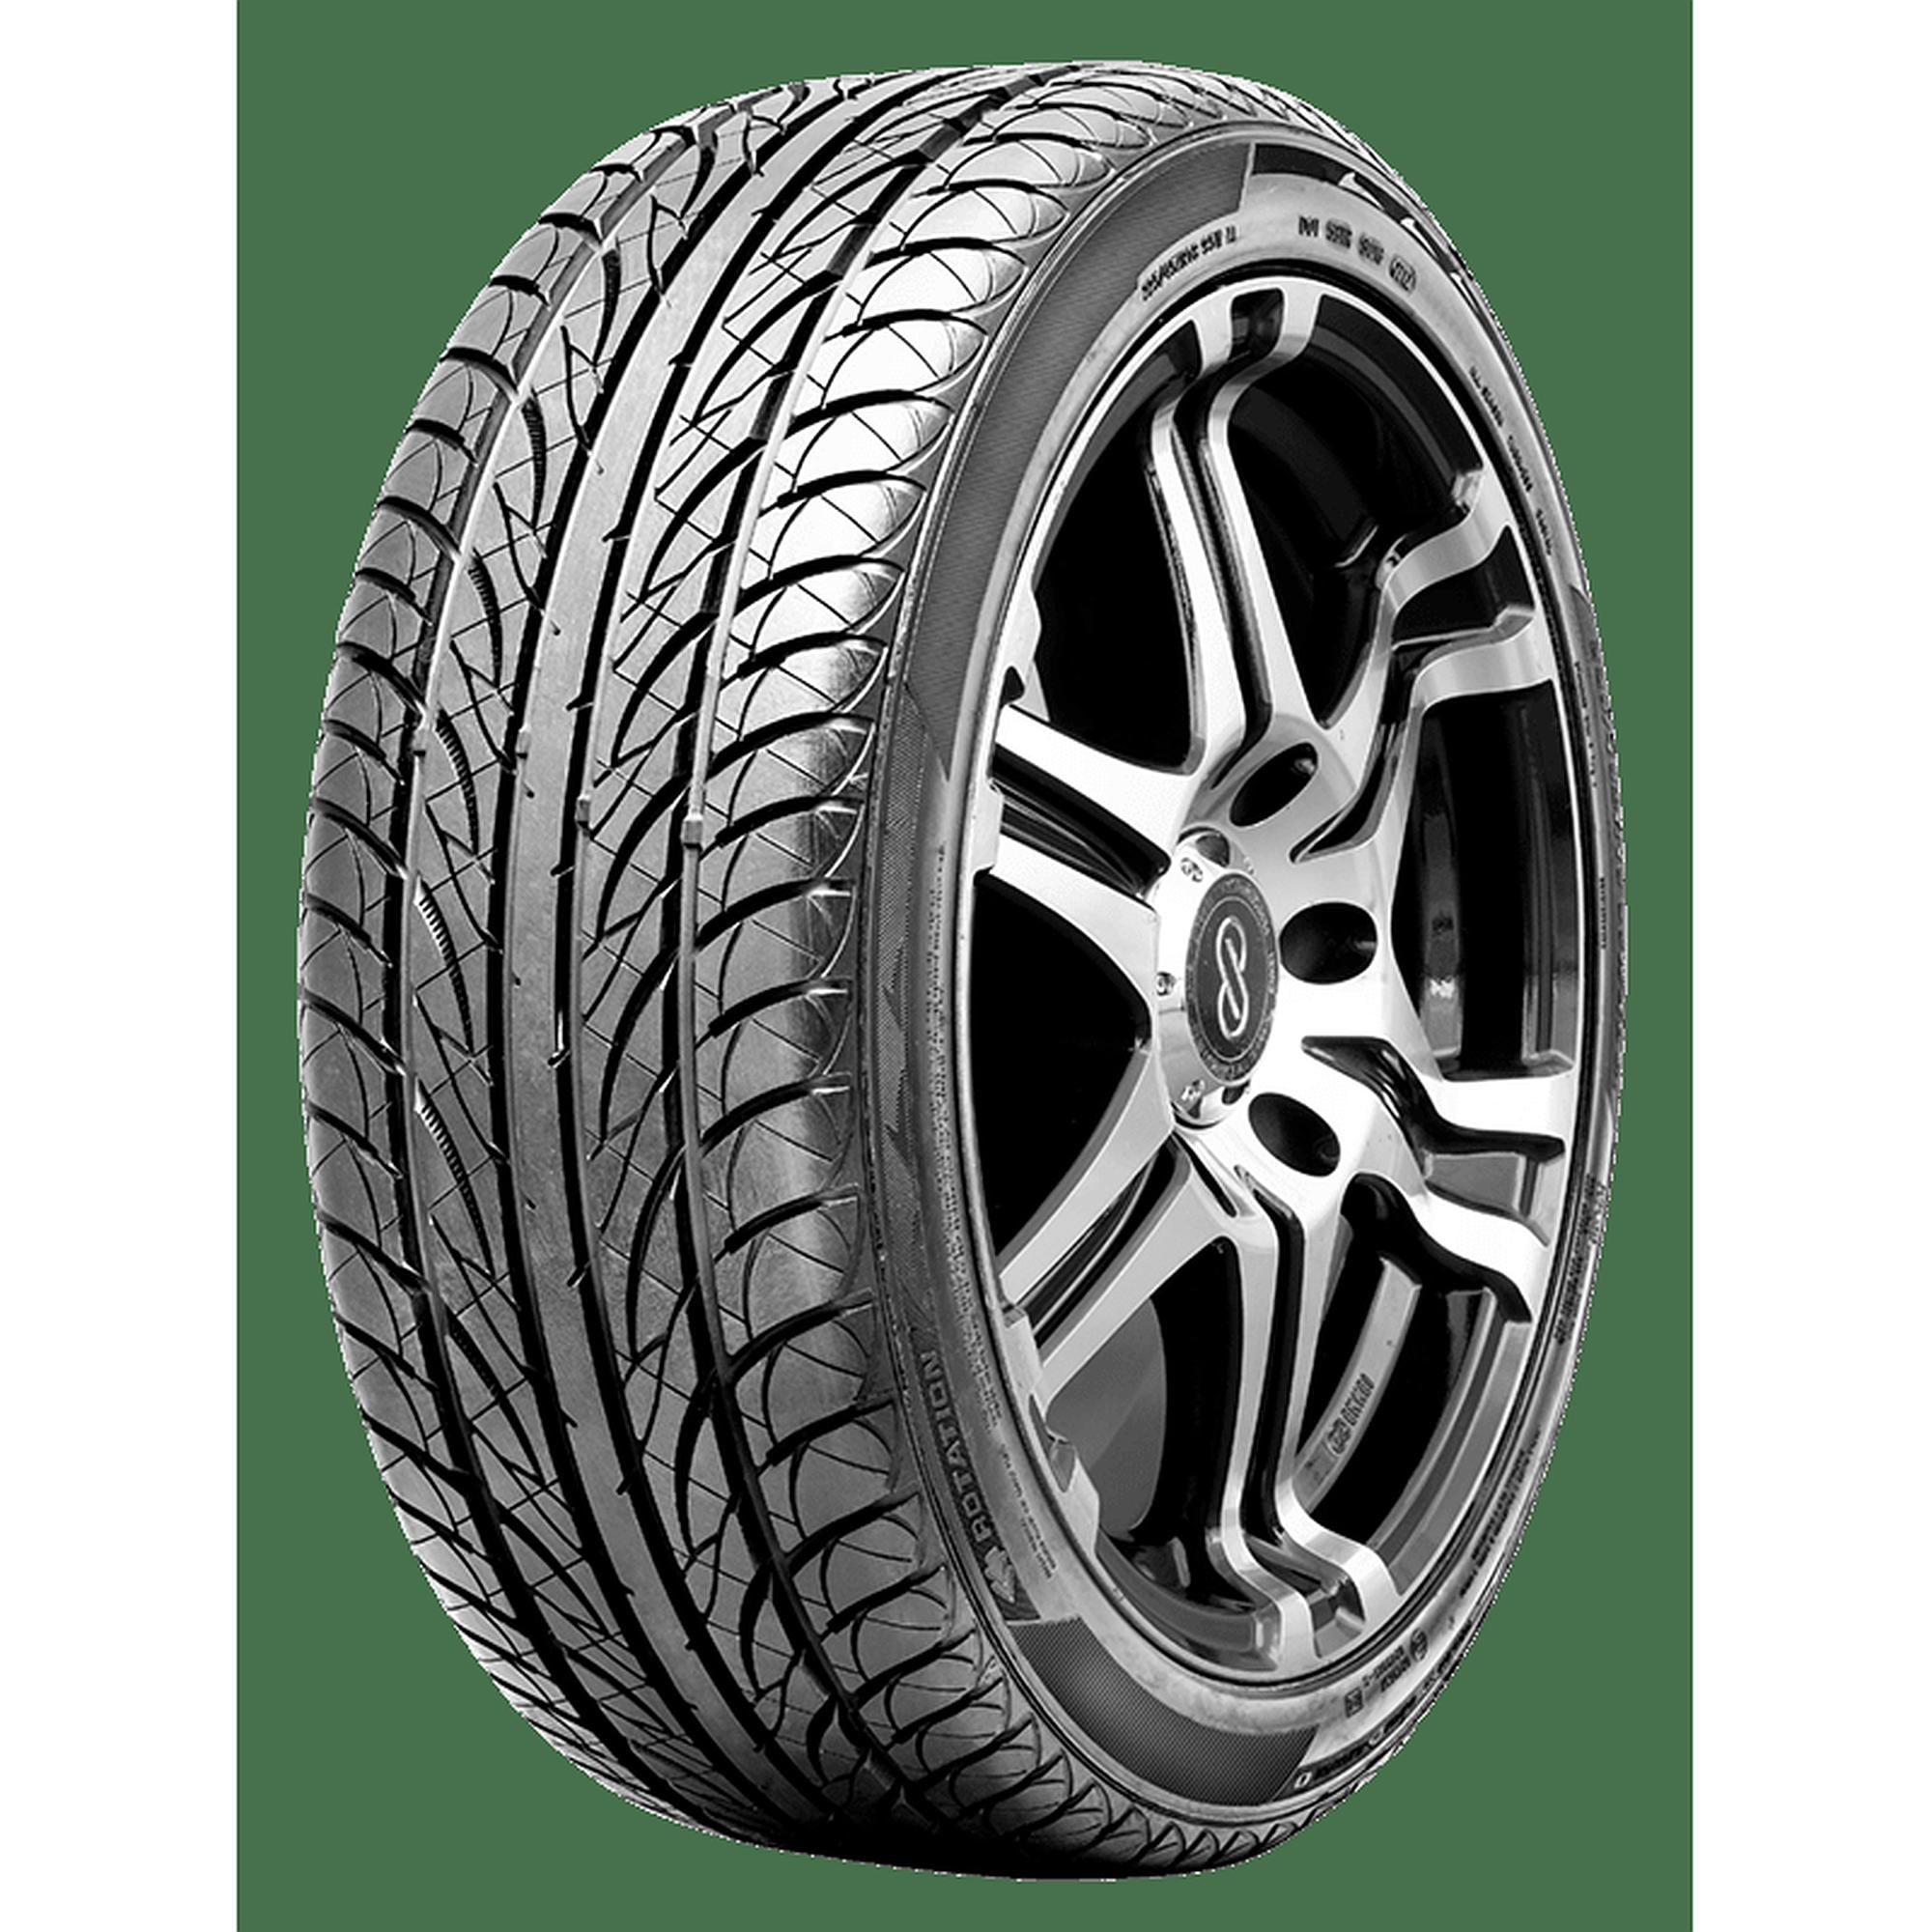 Cabrio, WP51 74T Kumho Smart Ice Tires) (2 Fits: Fortwo Passion BSW 2008-10 155/60R15 Smart Electric Fortwo 2012-15 WinterCraft Drive